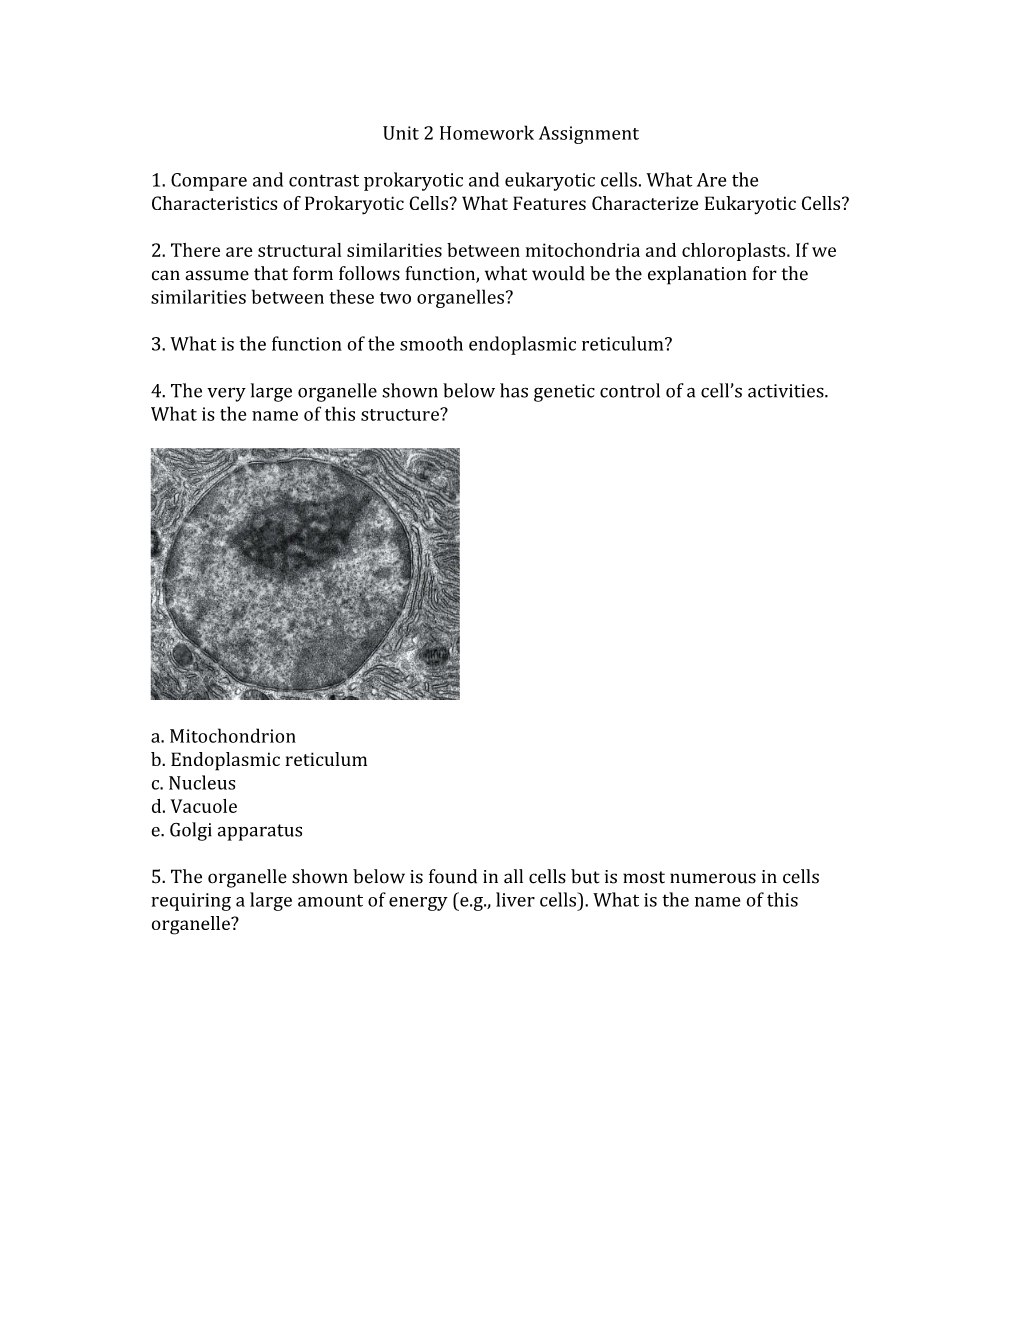 3. What Is the Function of the Smooth Endoplasmic Reticulum?